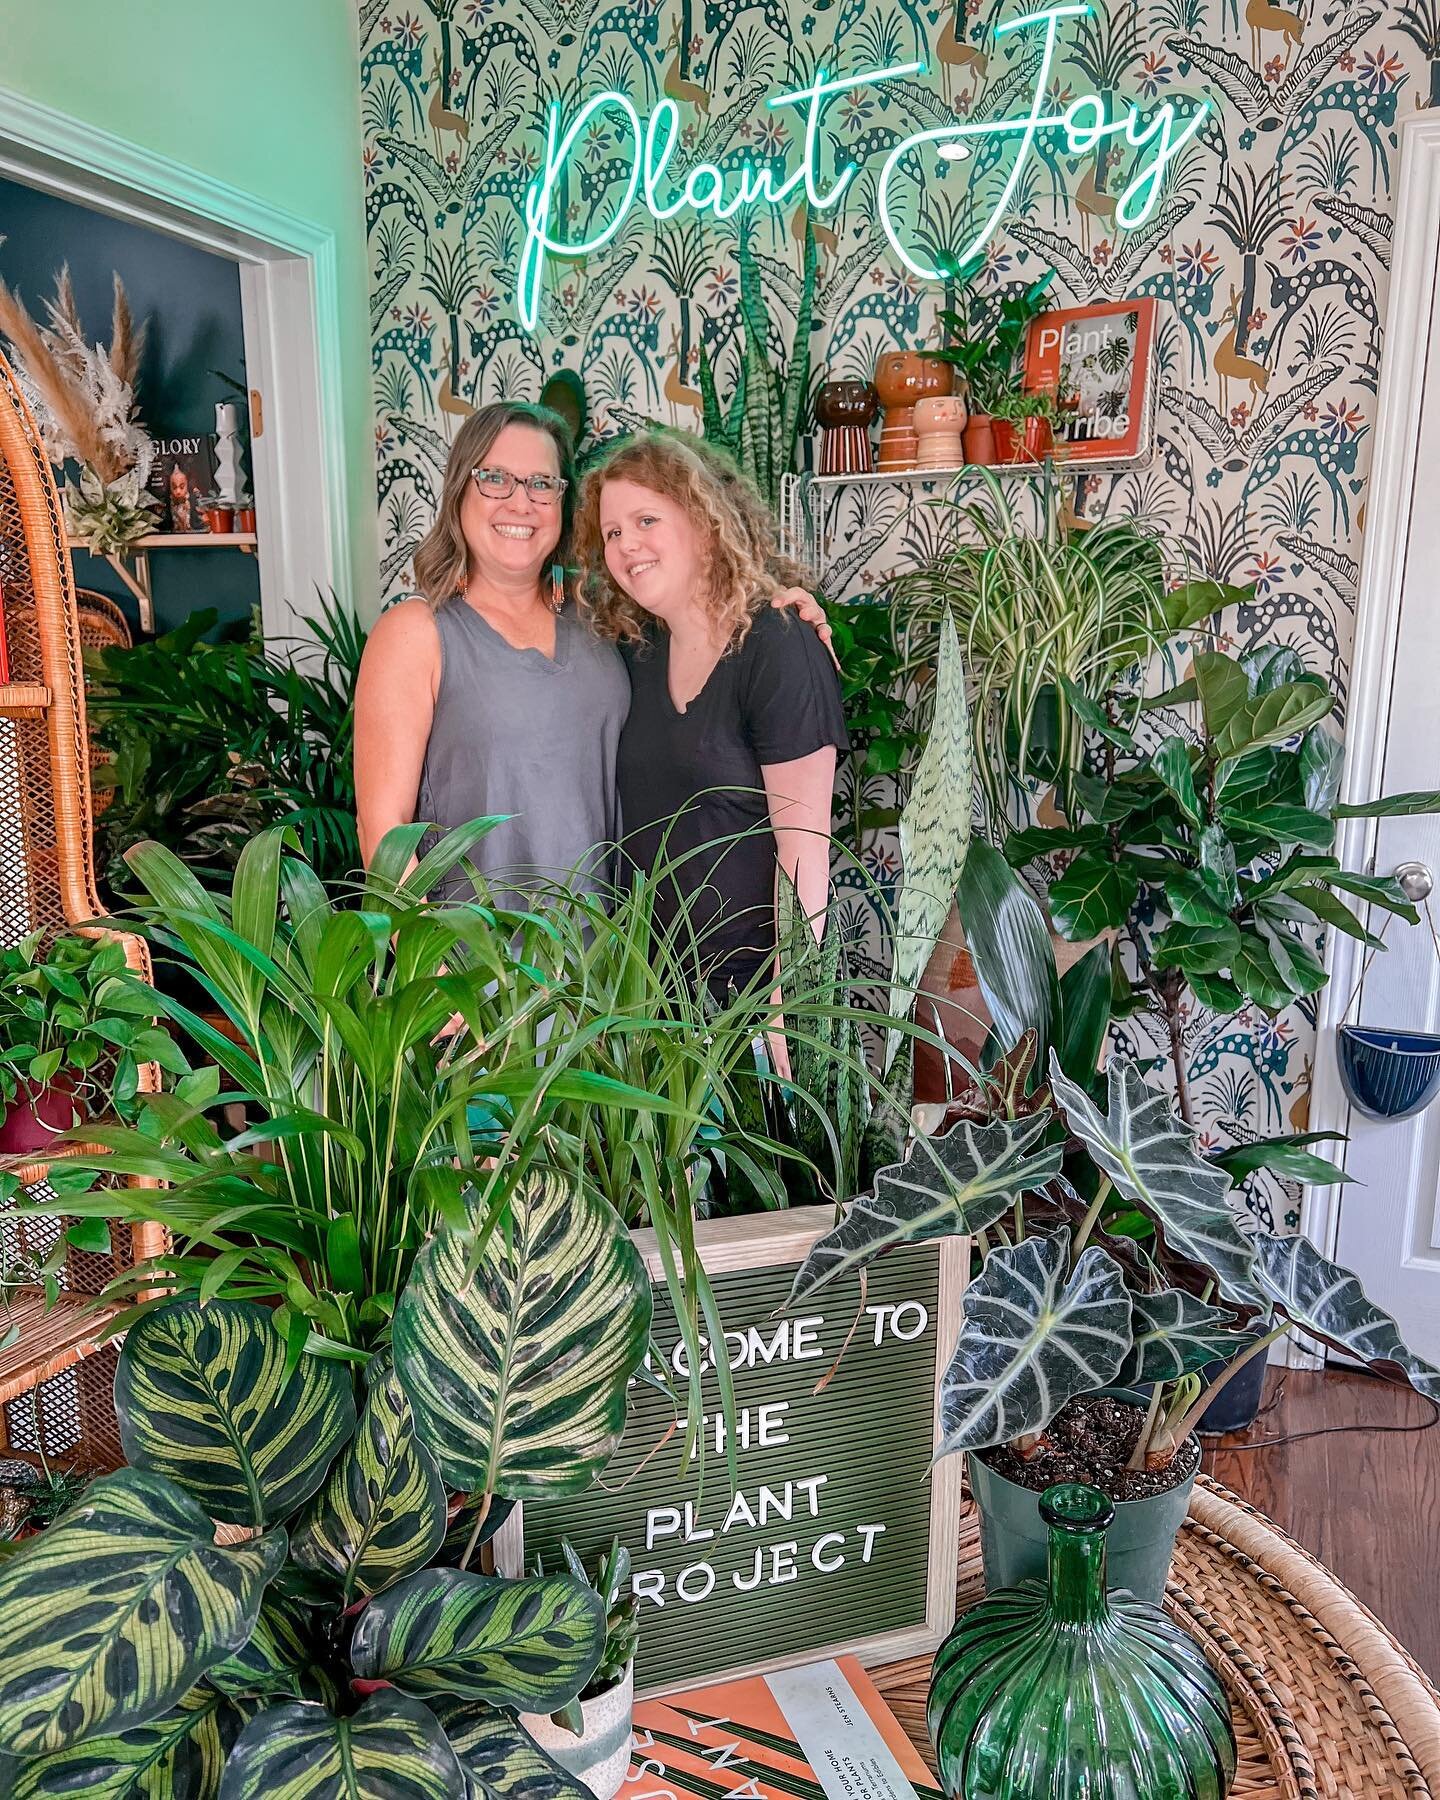 Ok&hellip;.so Dallas new hours are a hit! Why didn&rsquo;t you guys tell us earlier lol.

Slinging Plants, Pots, Soil &amp; Joy 10:00-6:00pm Daily. 

Thank you to these amazing gals for visiting us all the way from Royse City. (Found by way of @fortw